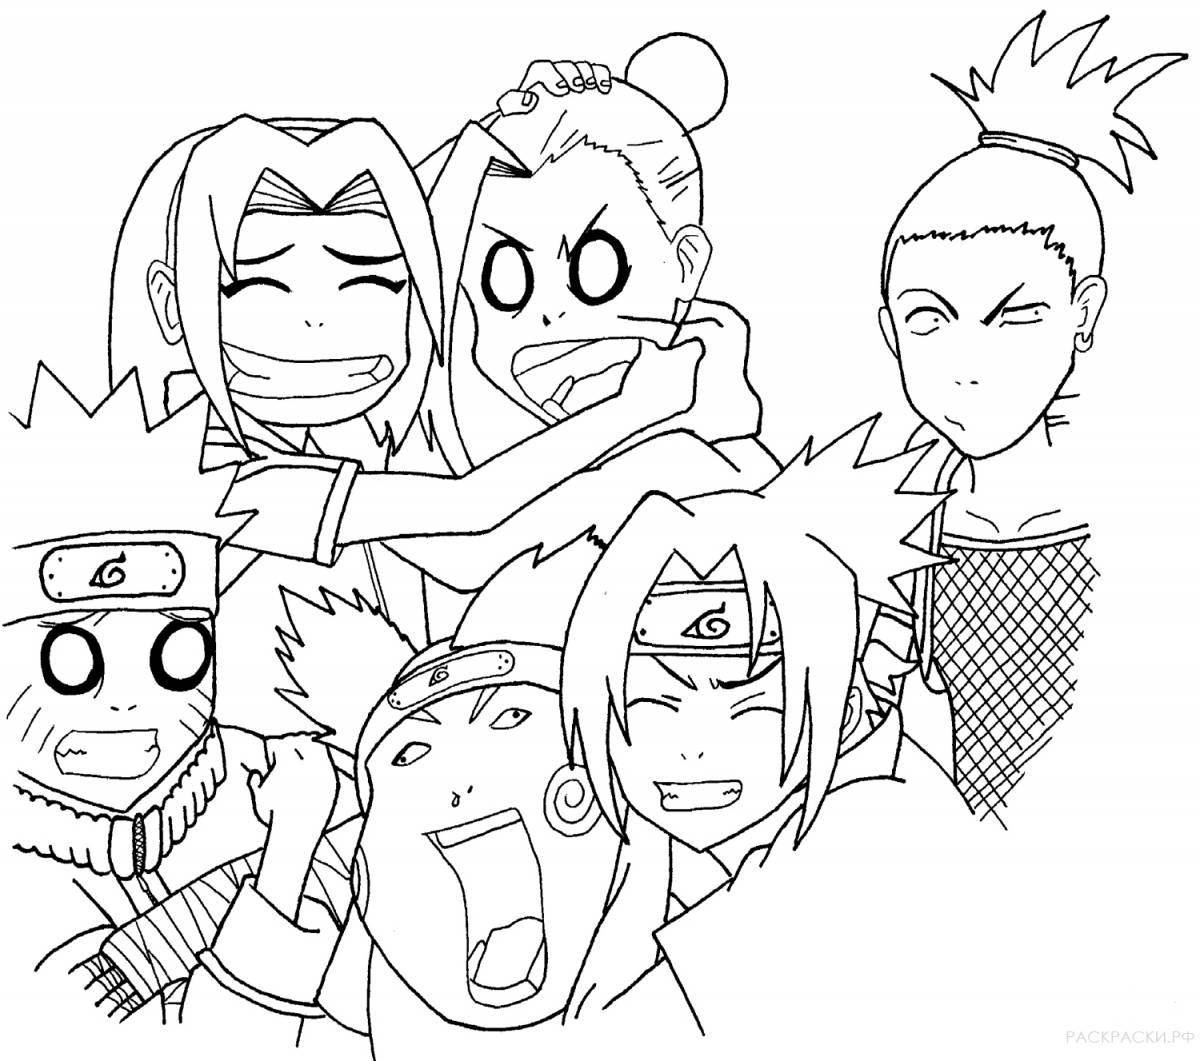 Coloring book witty naruto characters